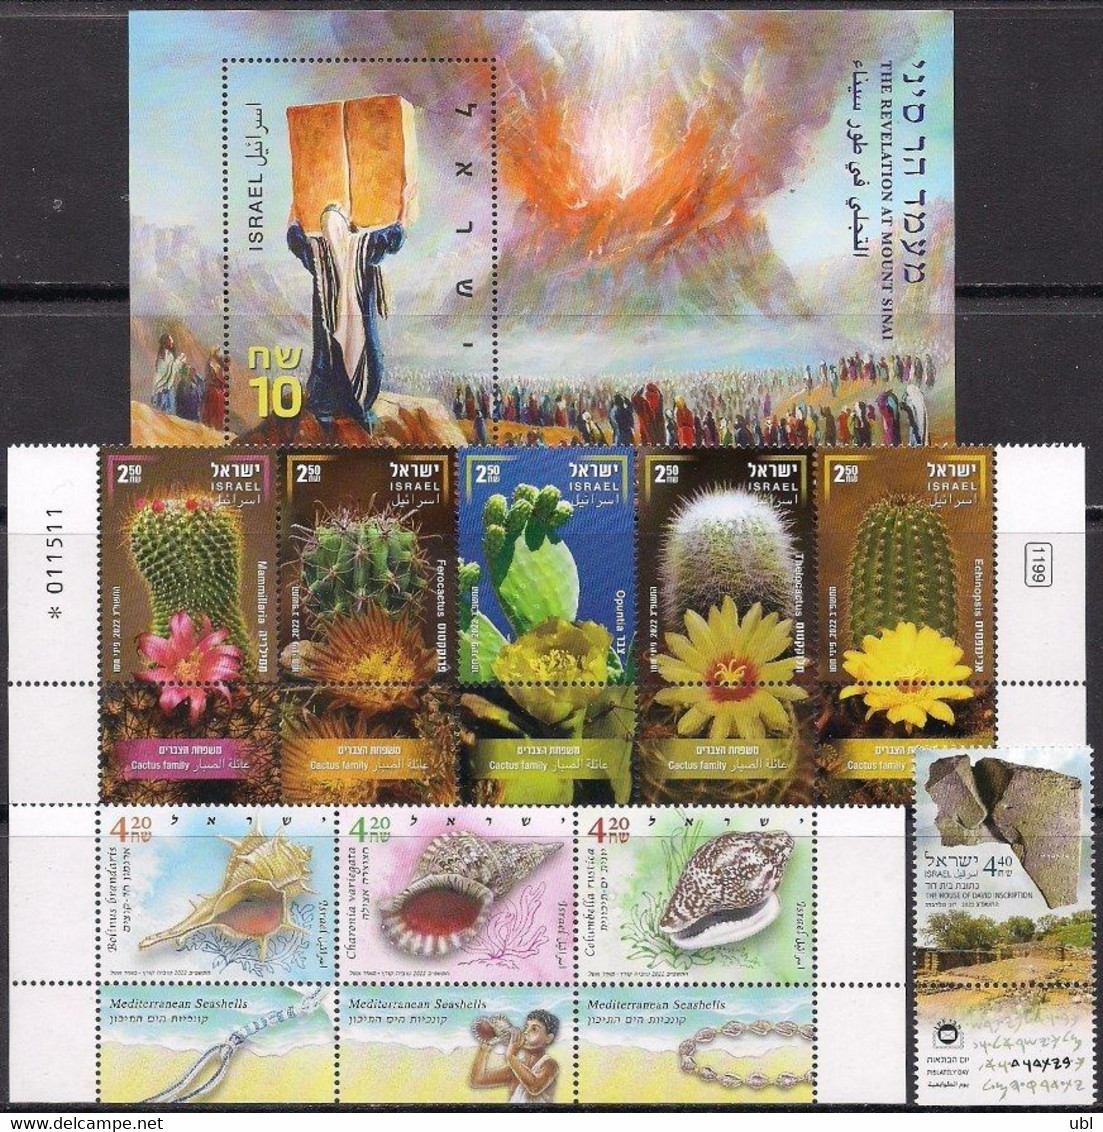 ISRAEL 2022 YEARBOOK - THE COMPLETE ANNUAL STAMPS & SOUVENIR SHEET ISSUE IN A DECORATIVE ALBUM - Lots & Serien